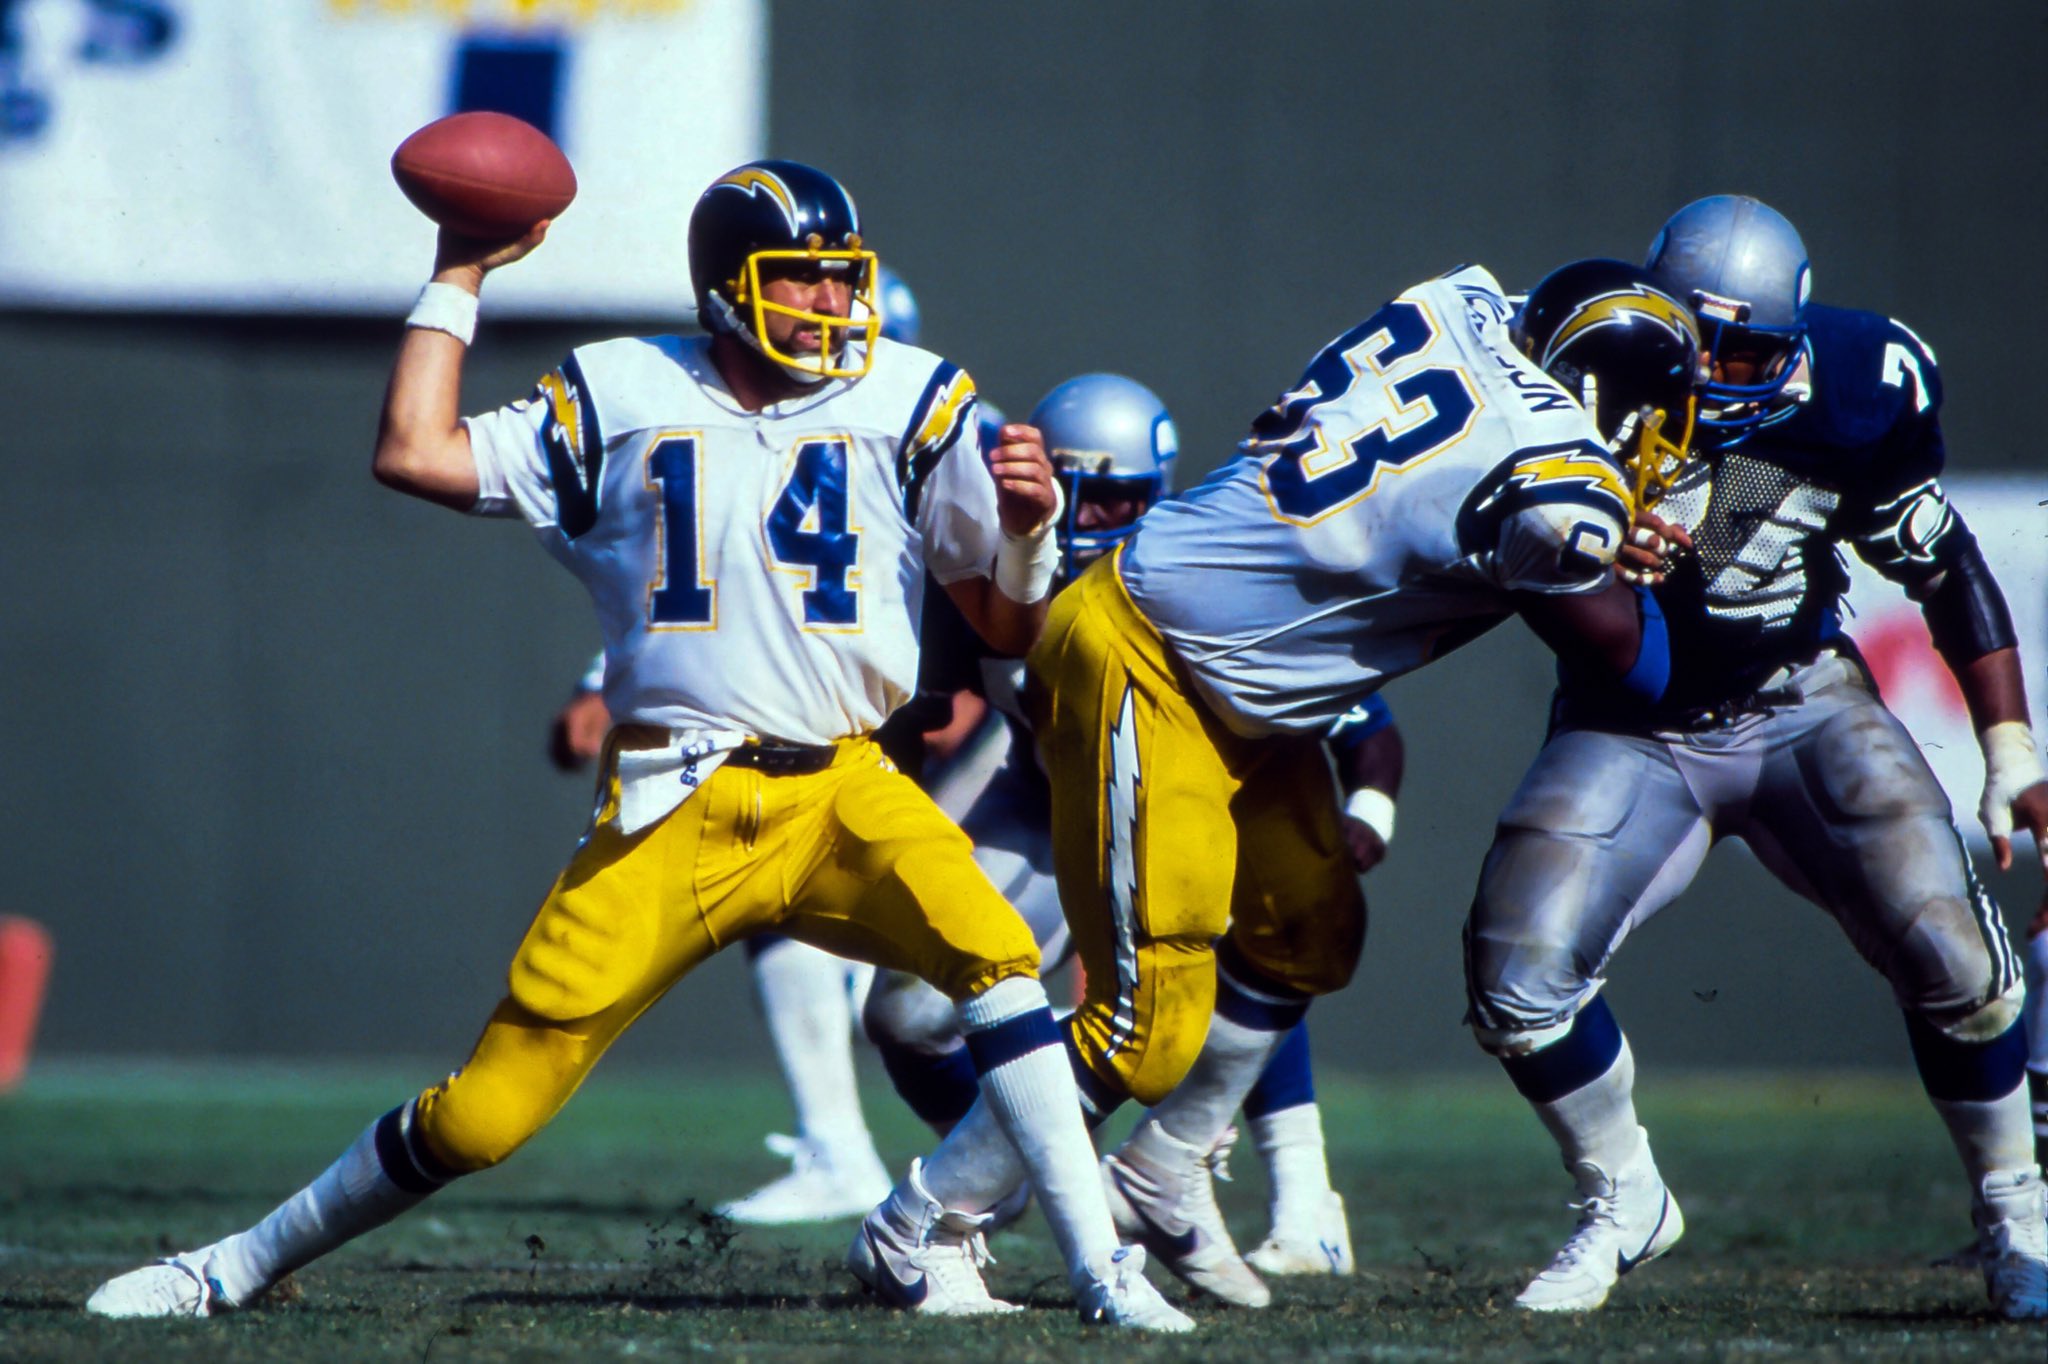 Happy Birthday to my last childhood hero, HOFer Dan Fouts of the \"San Diego\" Chargers.  